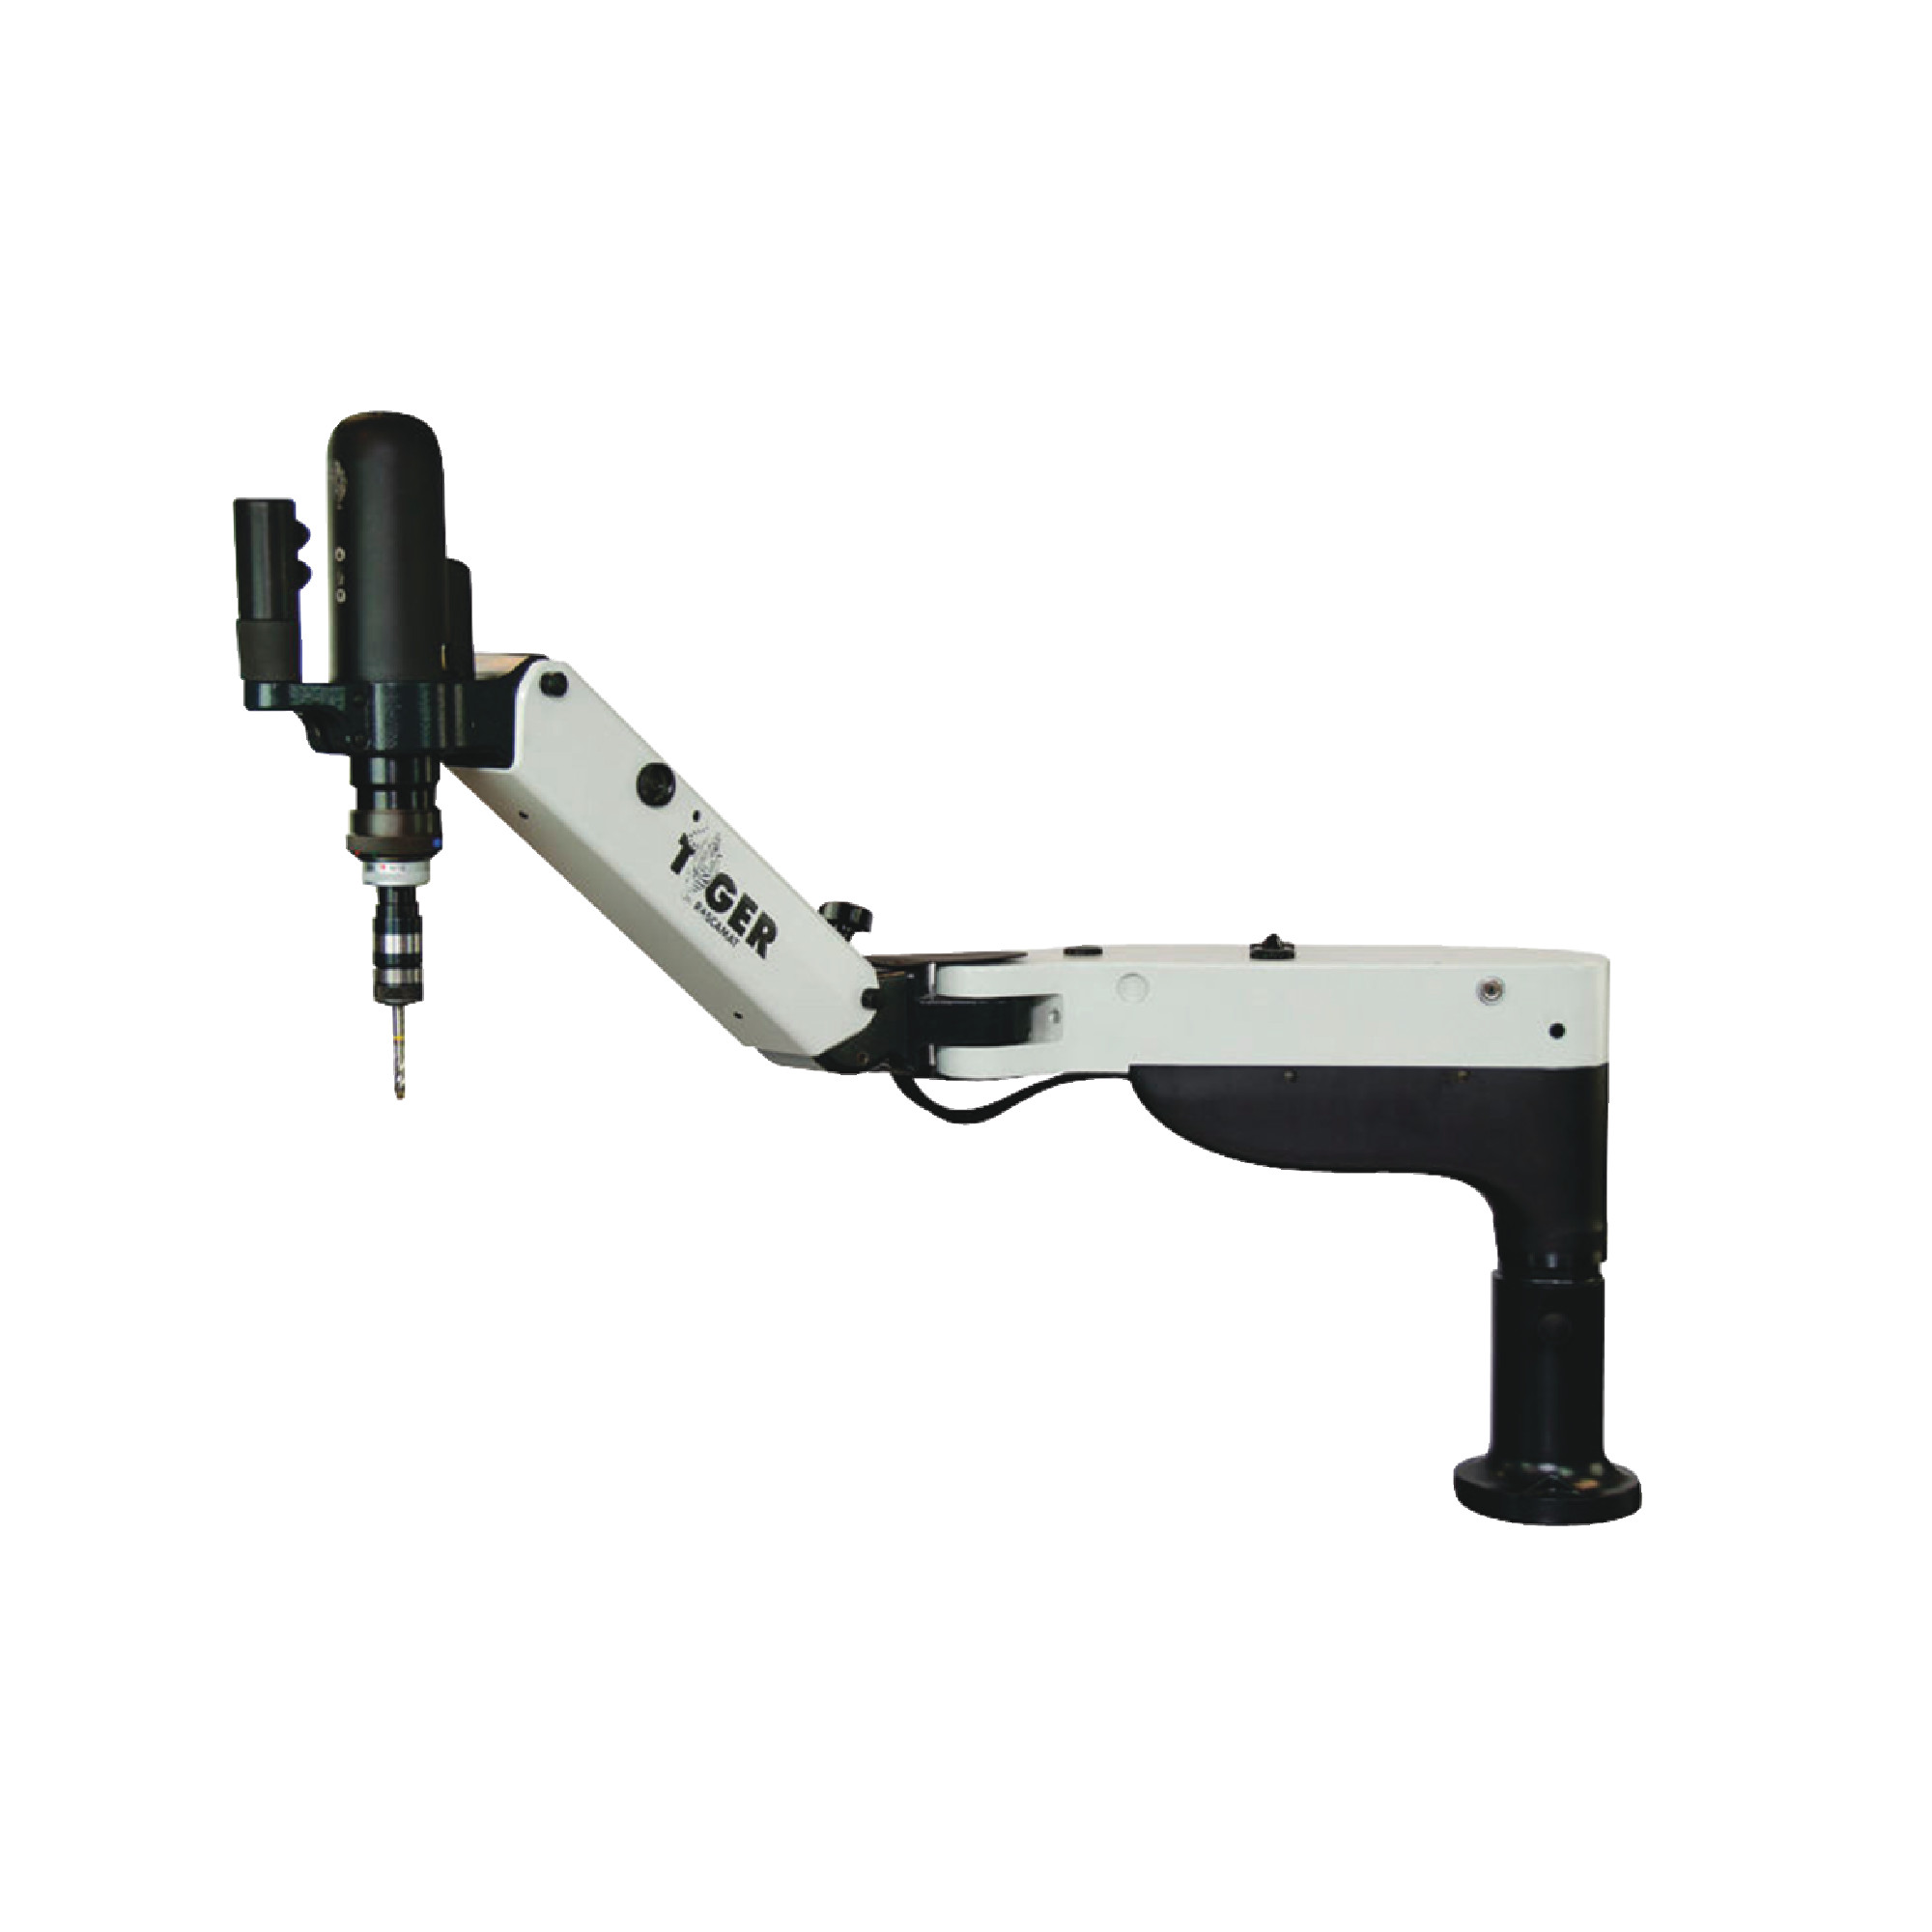 Vertical & Horizontal Tapping Arm